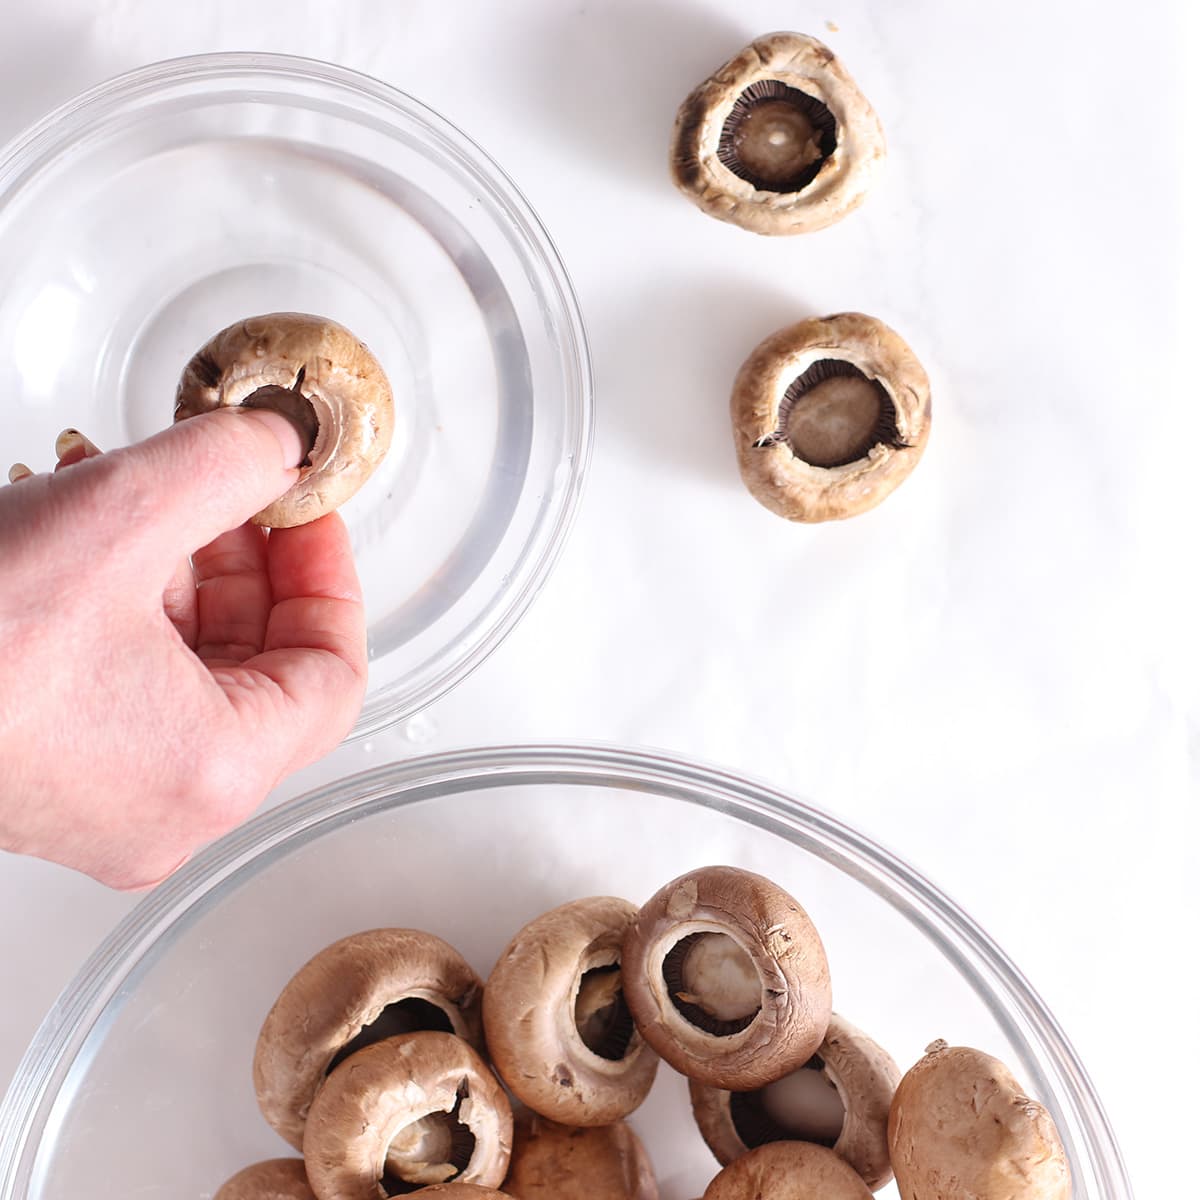 washing mushrooms in a bowl of water.